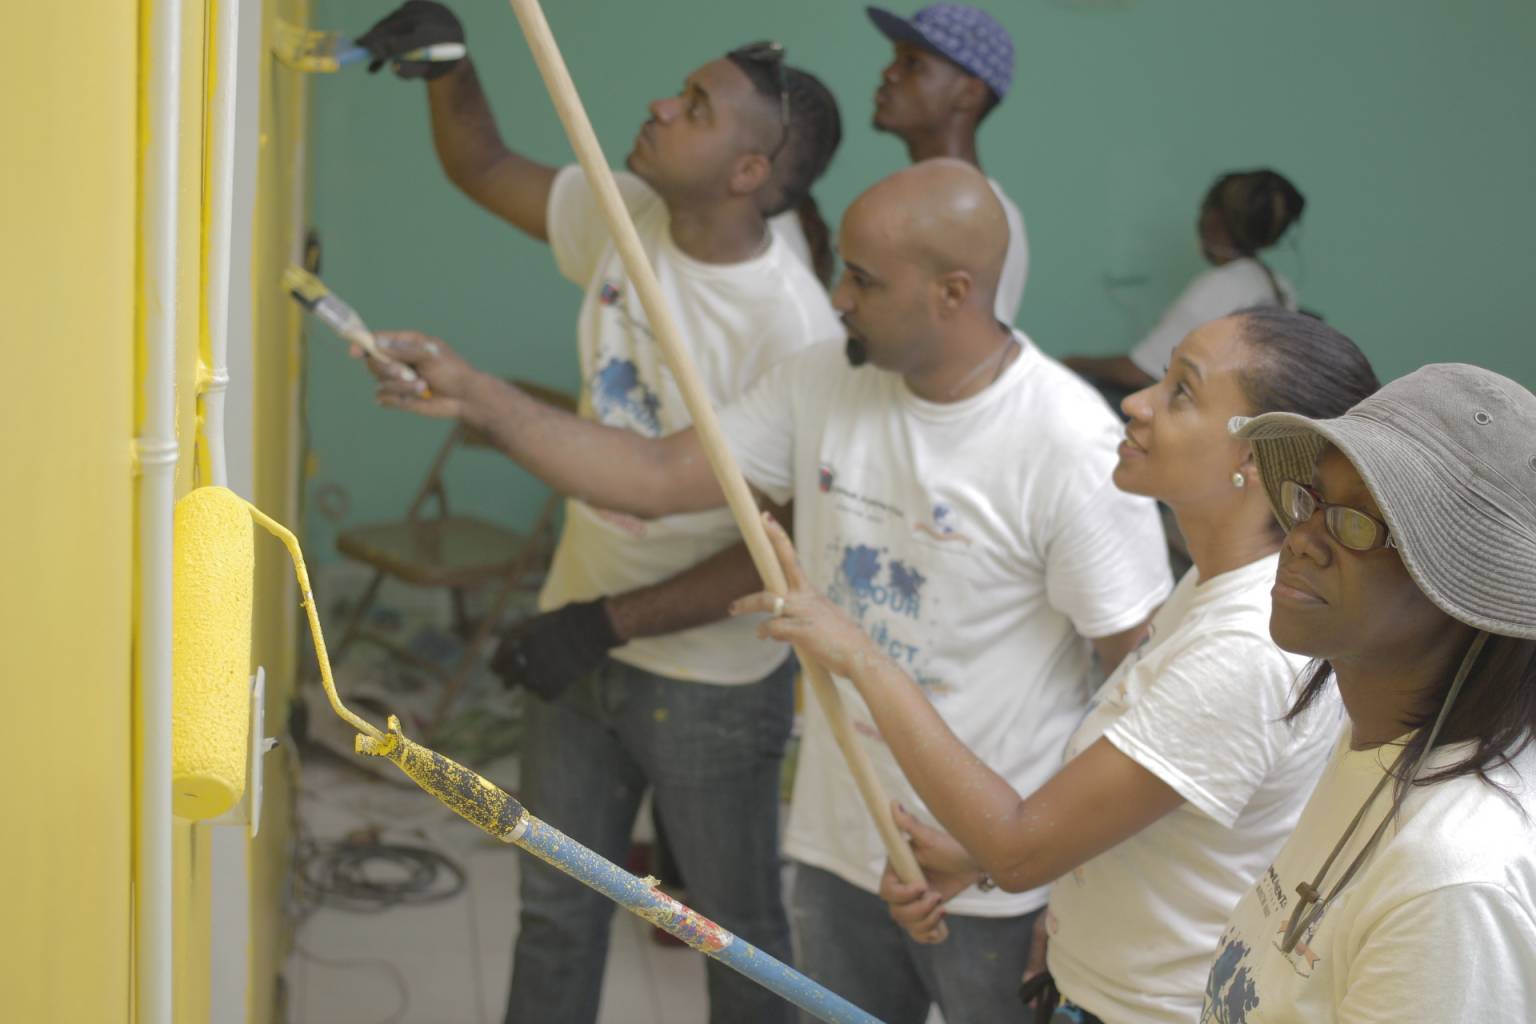 Abilities Foundation gets Facelift